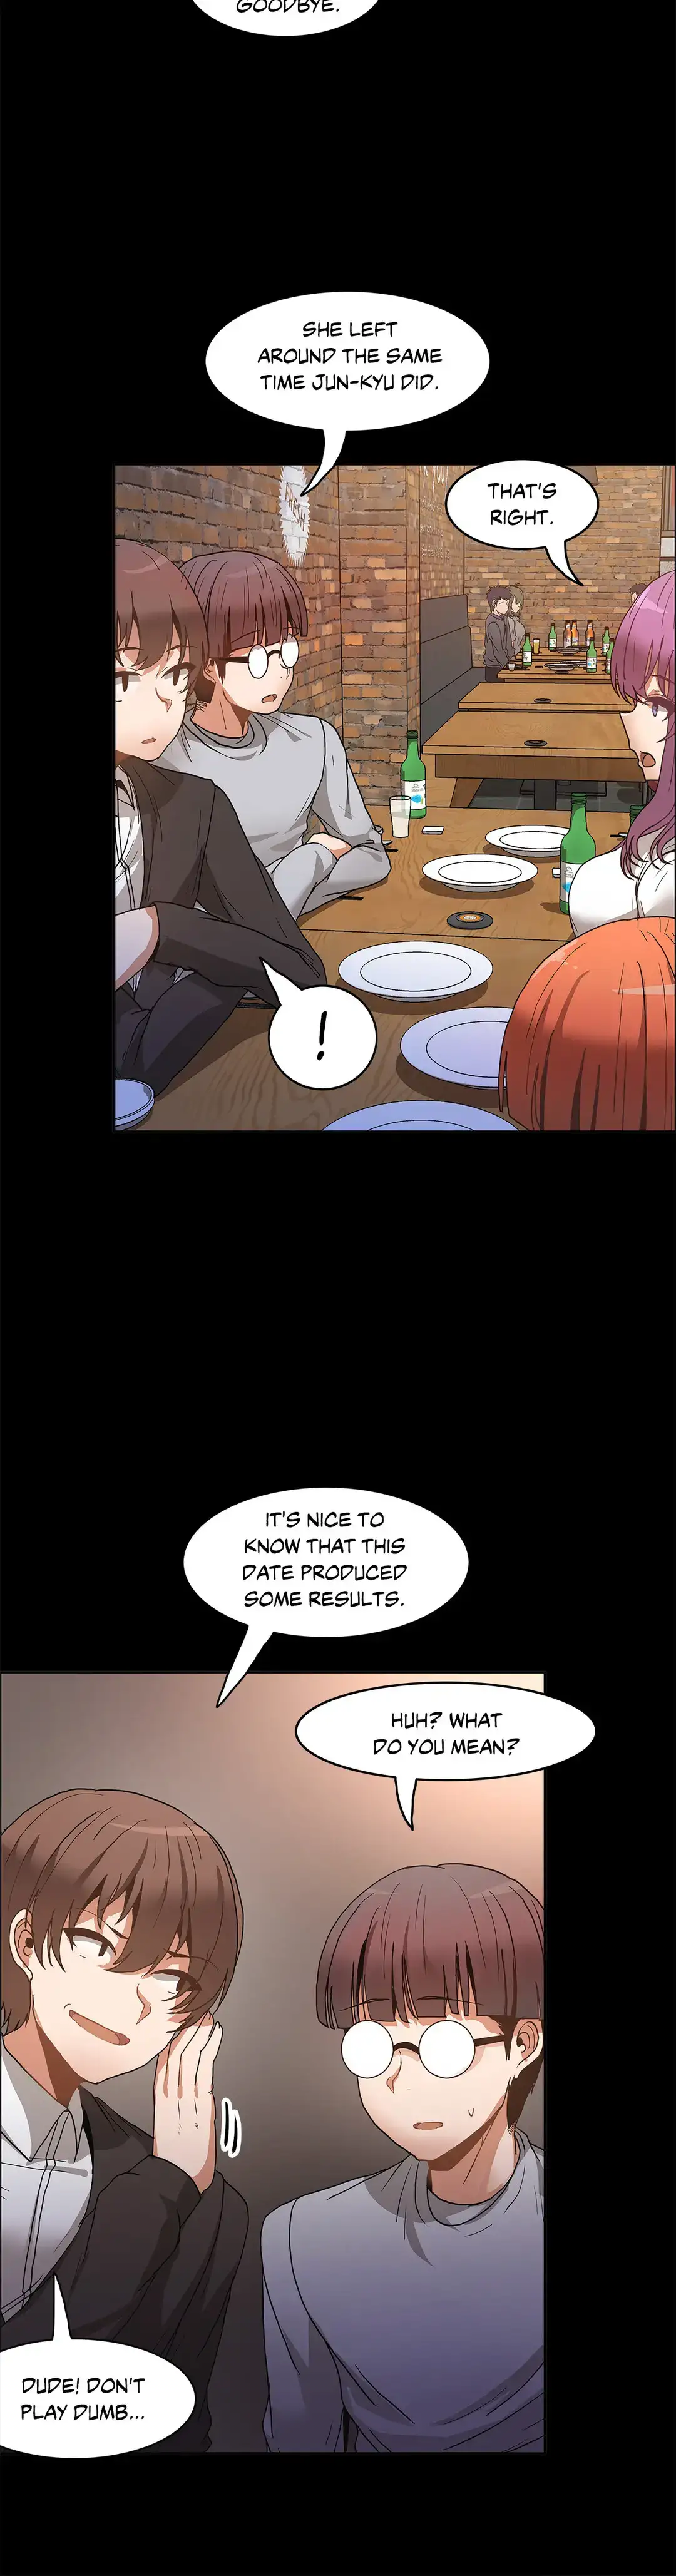 The Girl That Wet the Wall - Chapter 48 Page 5